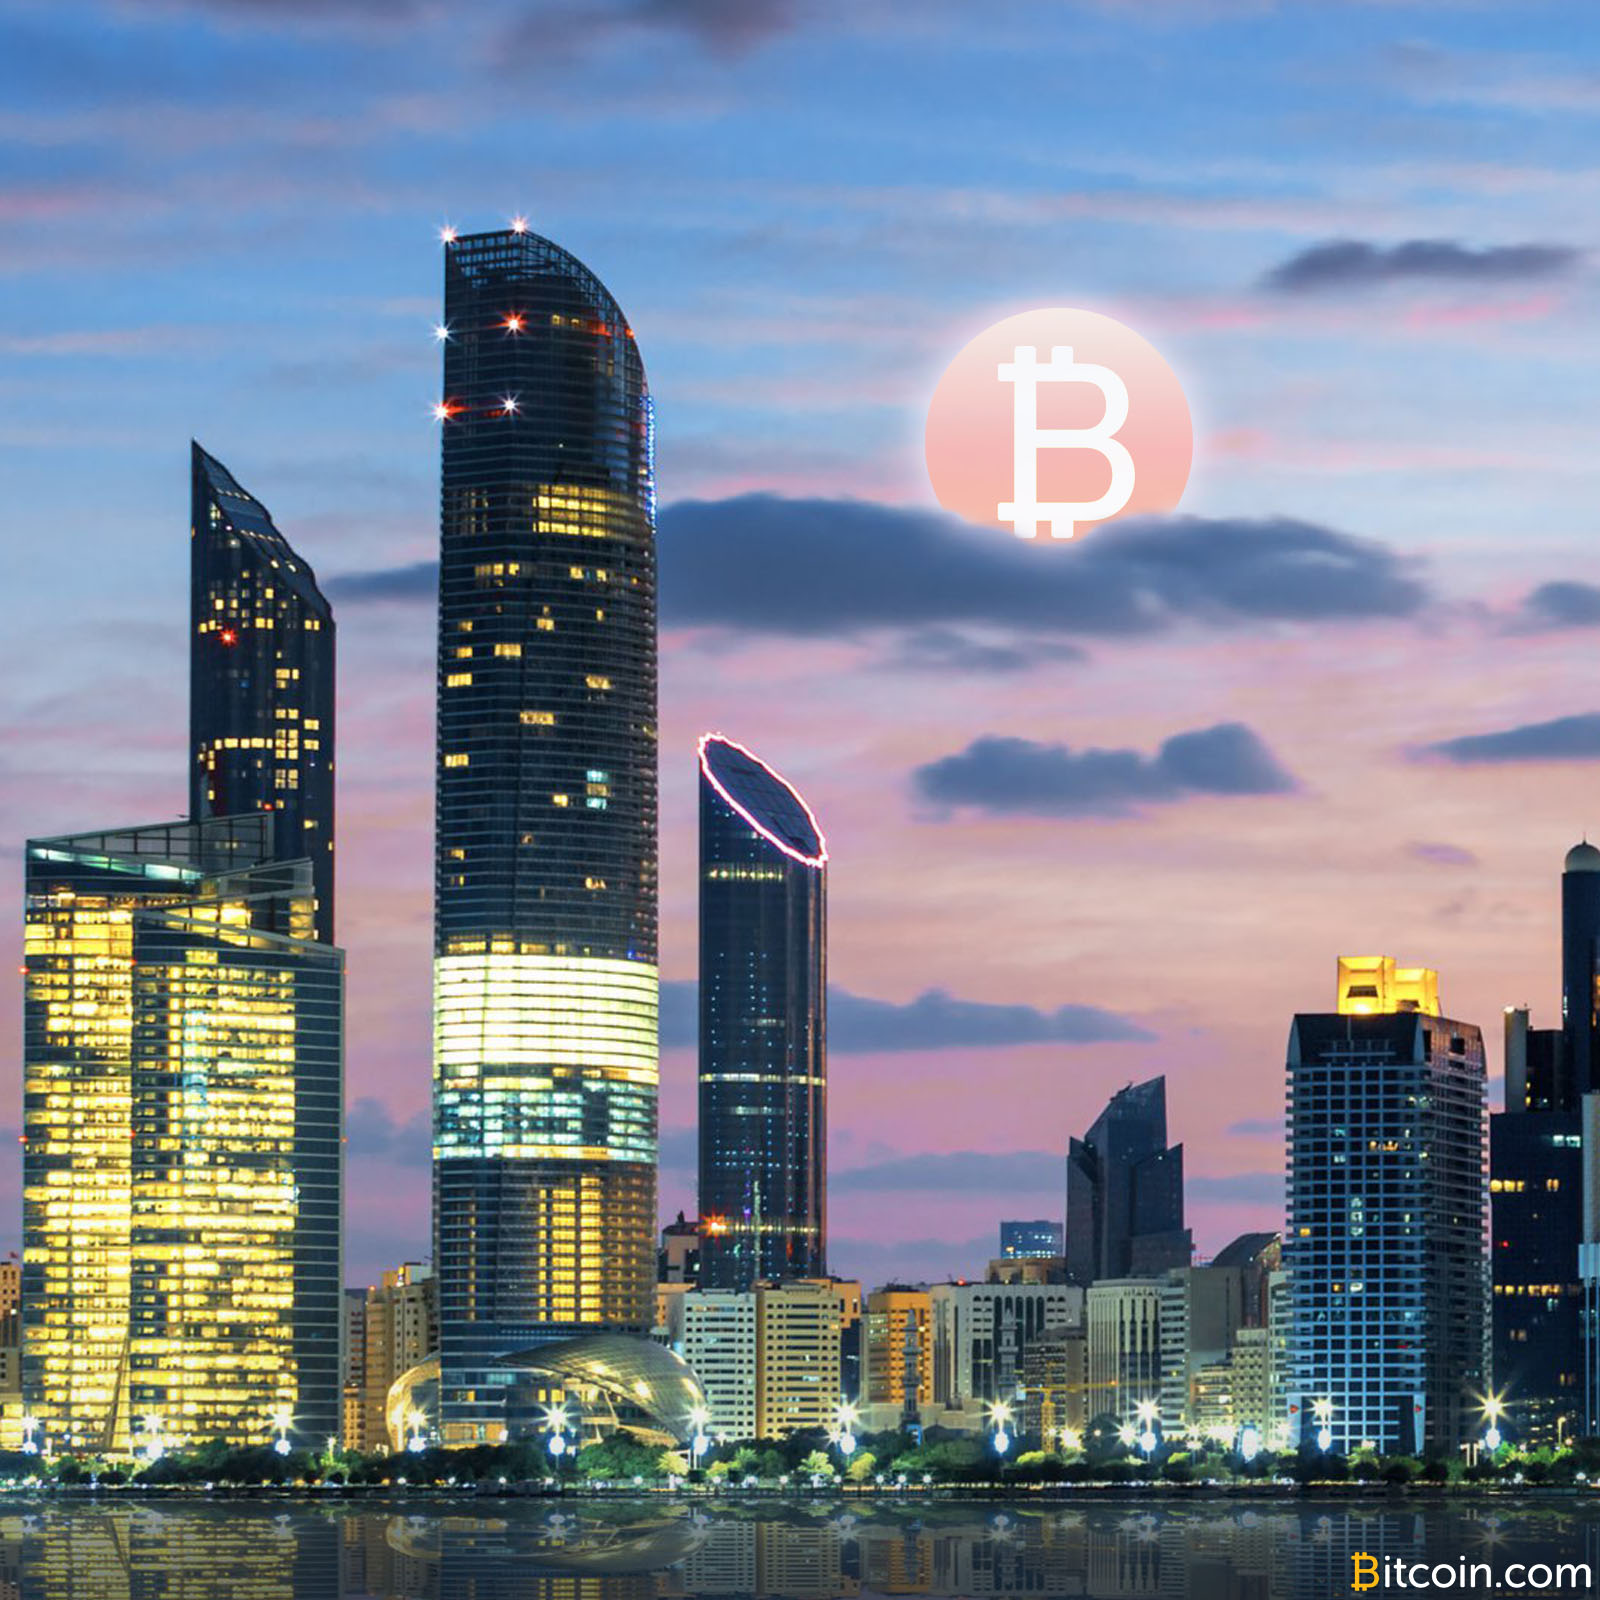 Abu Dhabi to Regulate Cryptocurrencies as Commodities and ICOs as 'Specified Investments'